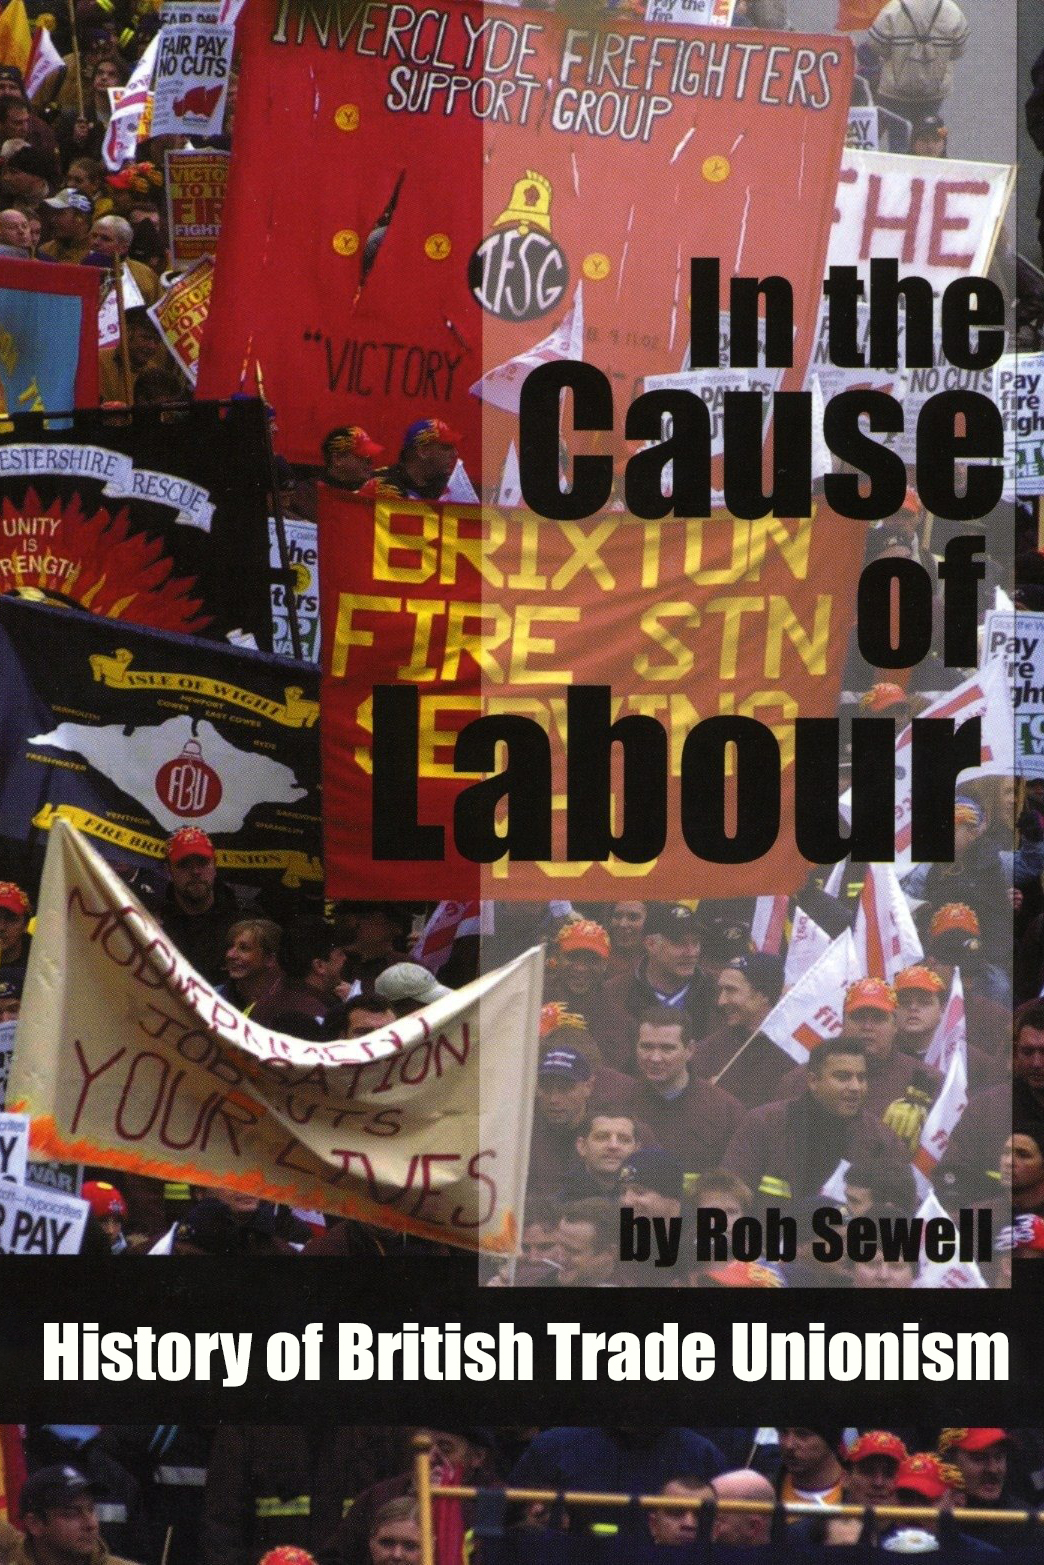 In the Cause of Labour